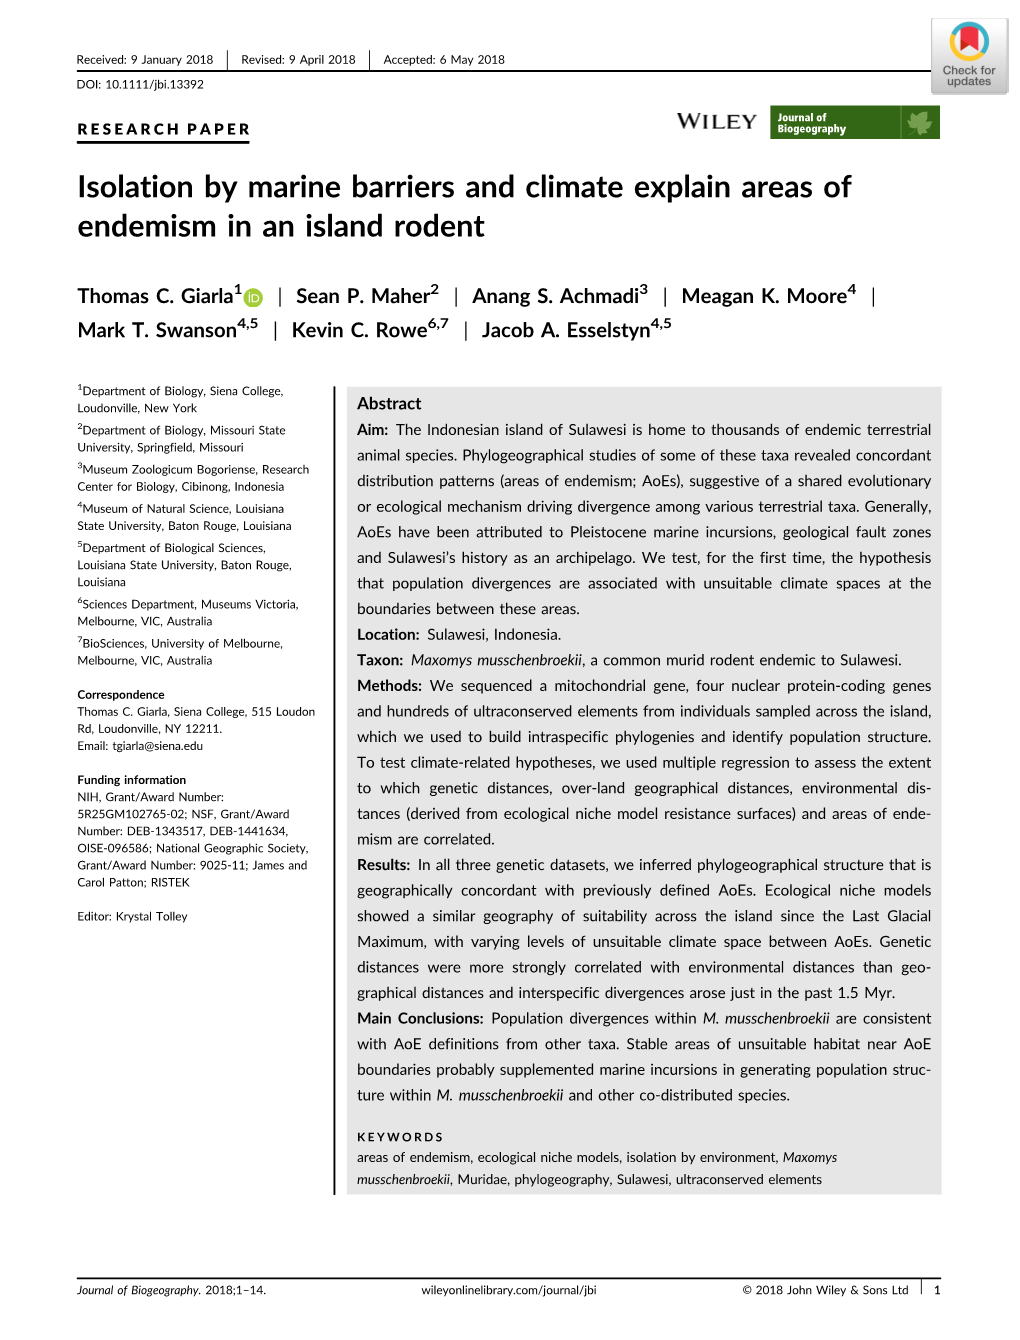 Isolation by Marine Barriers and Climate Explain Areas of Endemism in an Island Rodent